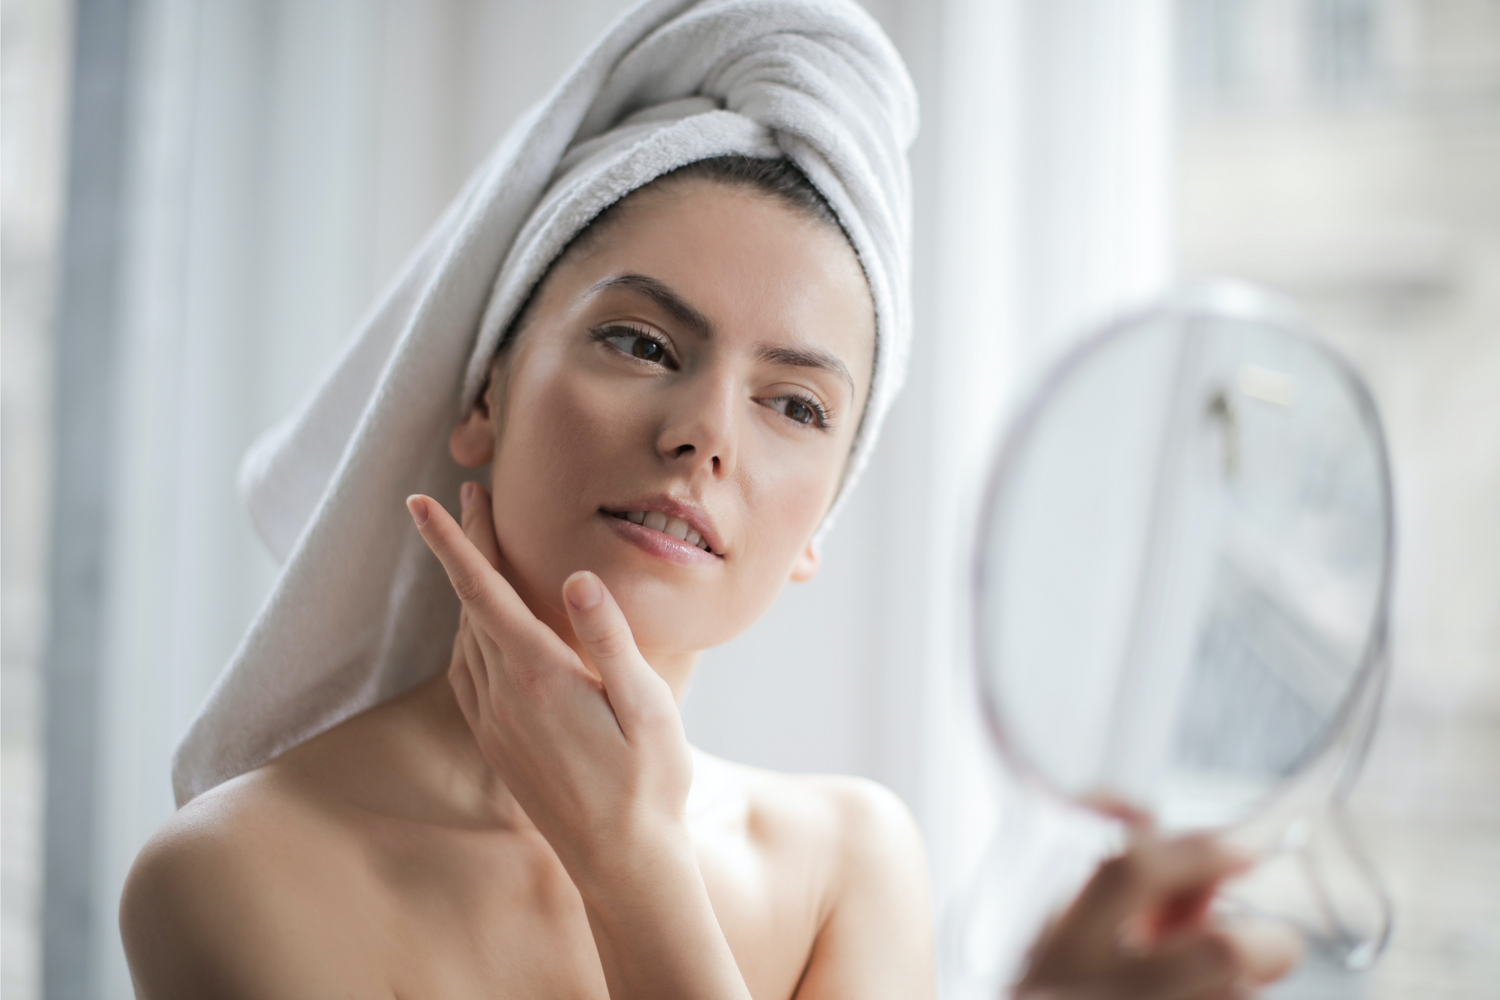 5 Anti-Aging Skincare Tips for Glowing, Youthful Skin